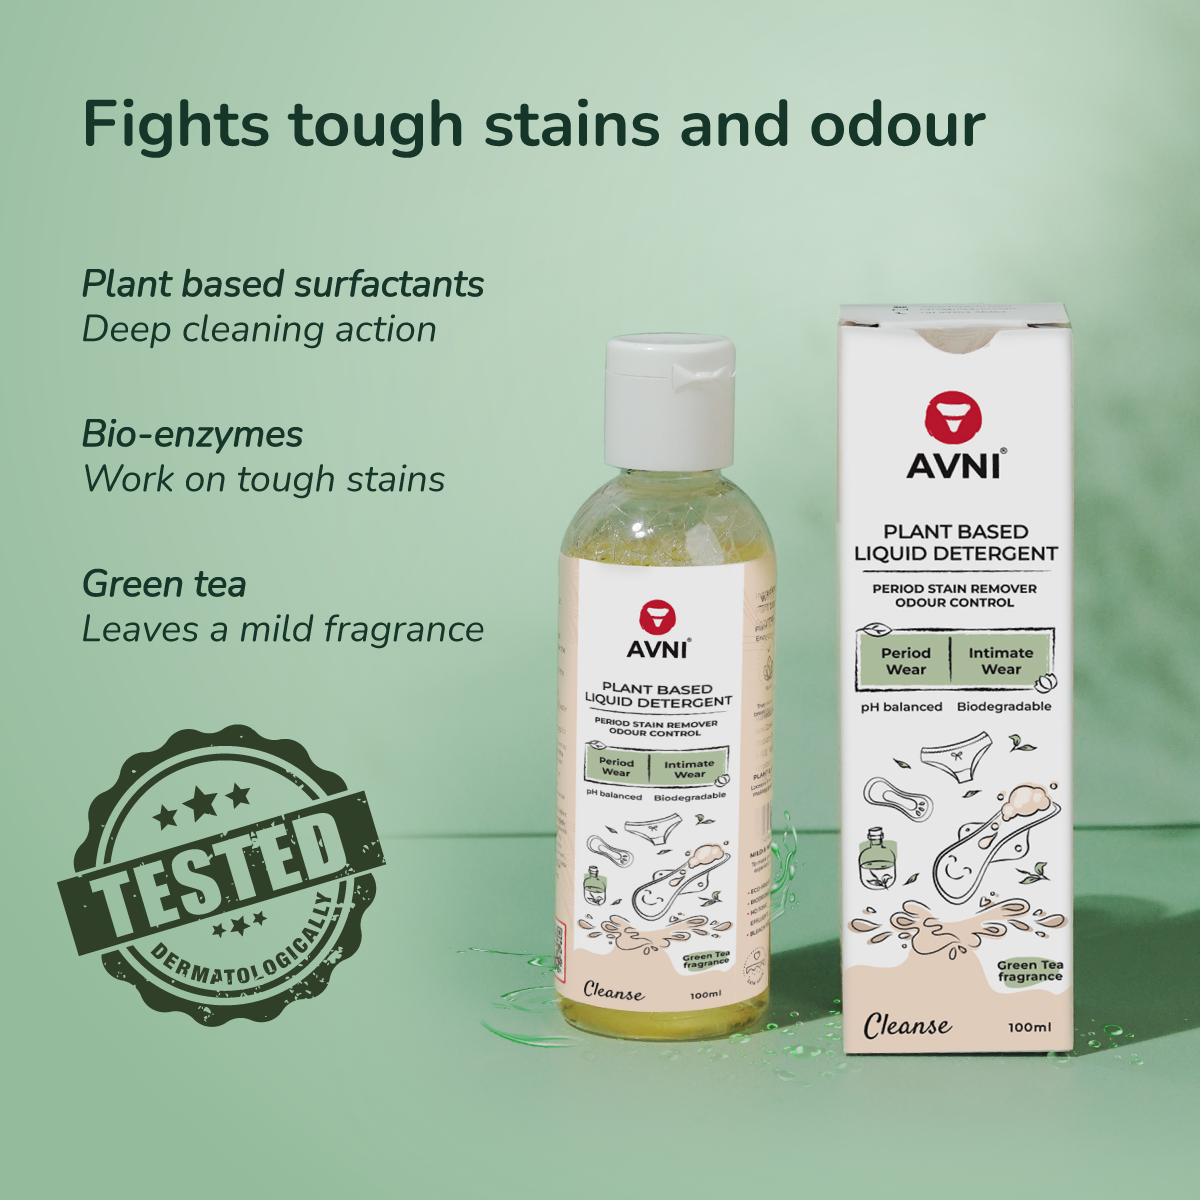 Plant based liquid detergent for period wear and intimate wear